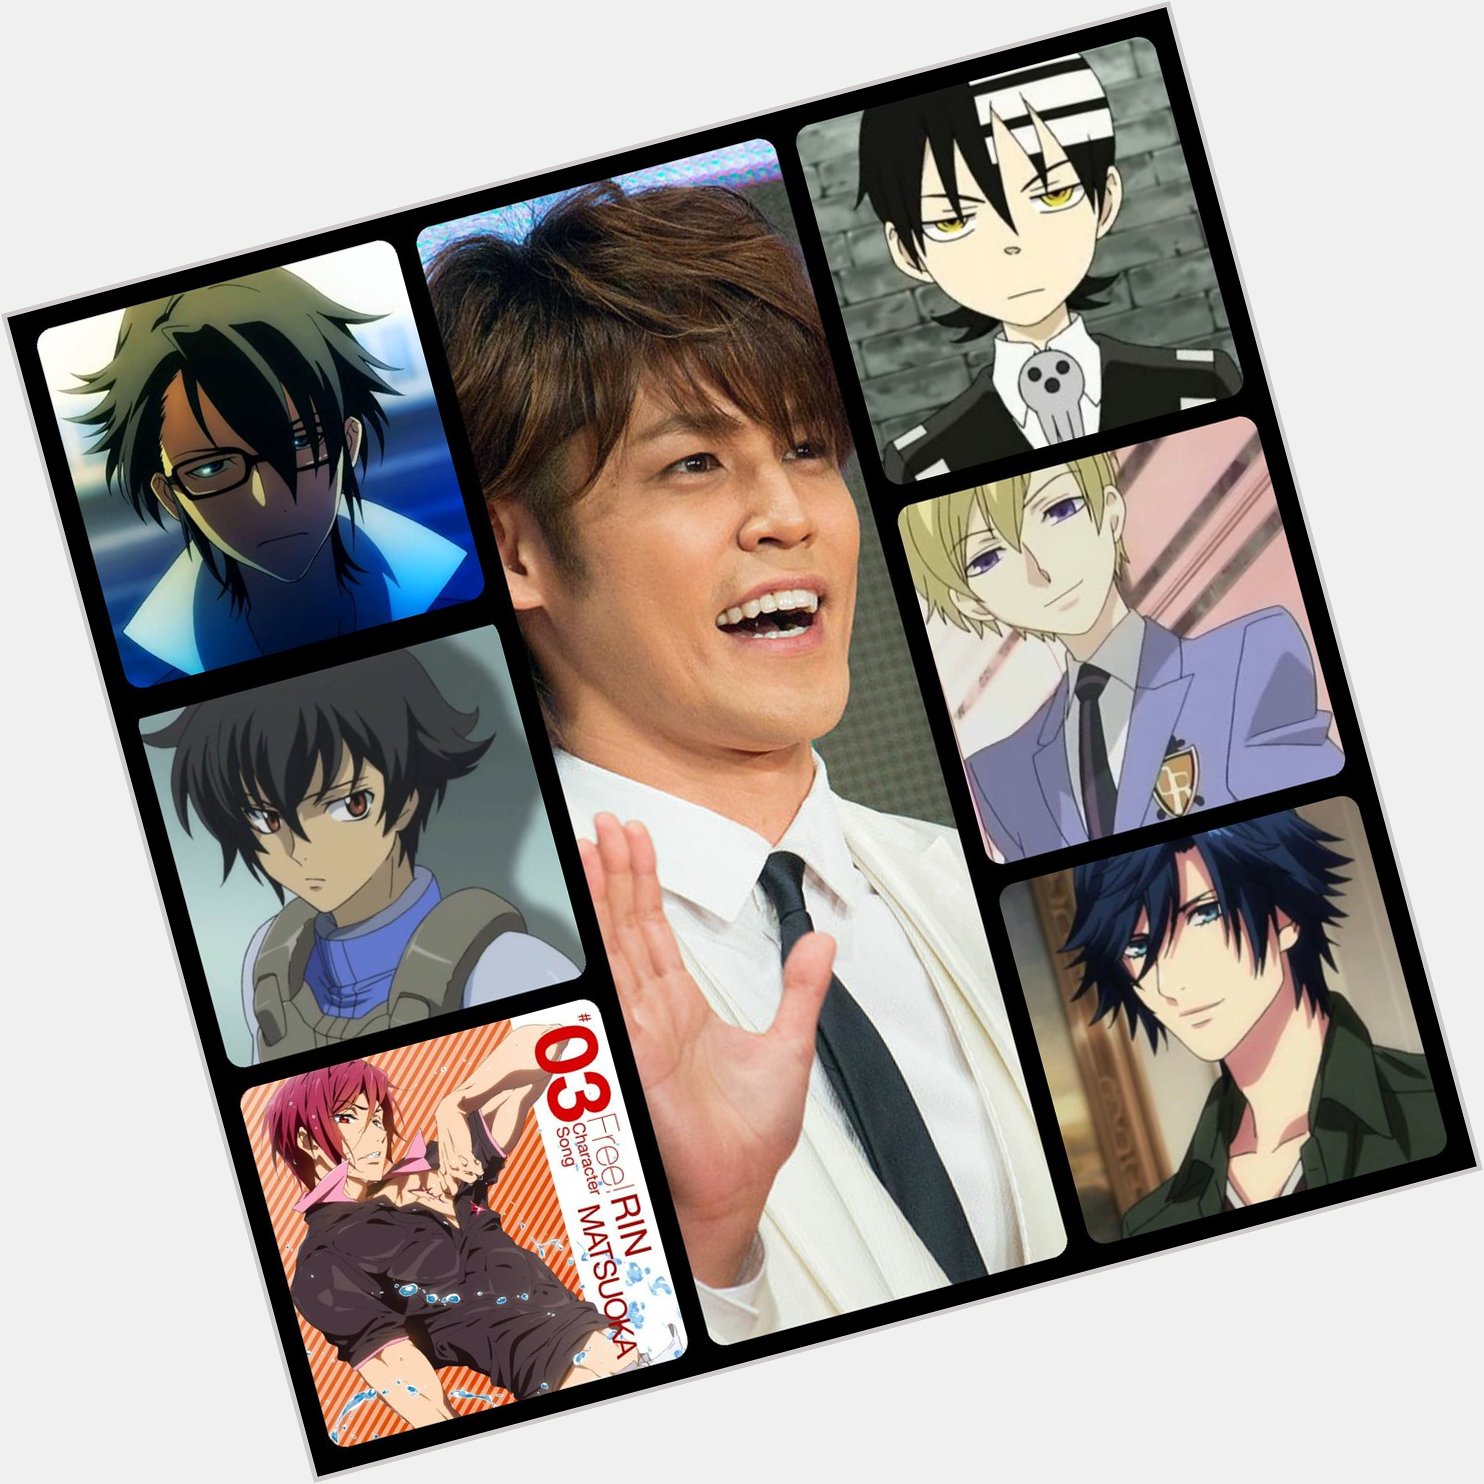 It\s June 8th in Japan, so a big Happy Birthday shout-out to one of my favorite seiyuu\s Mamoru Miyano!!!  